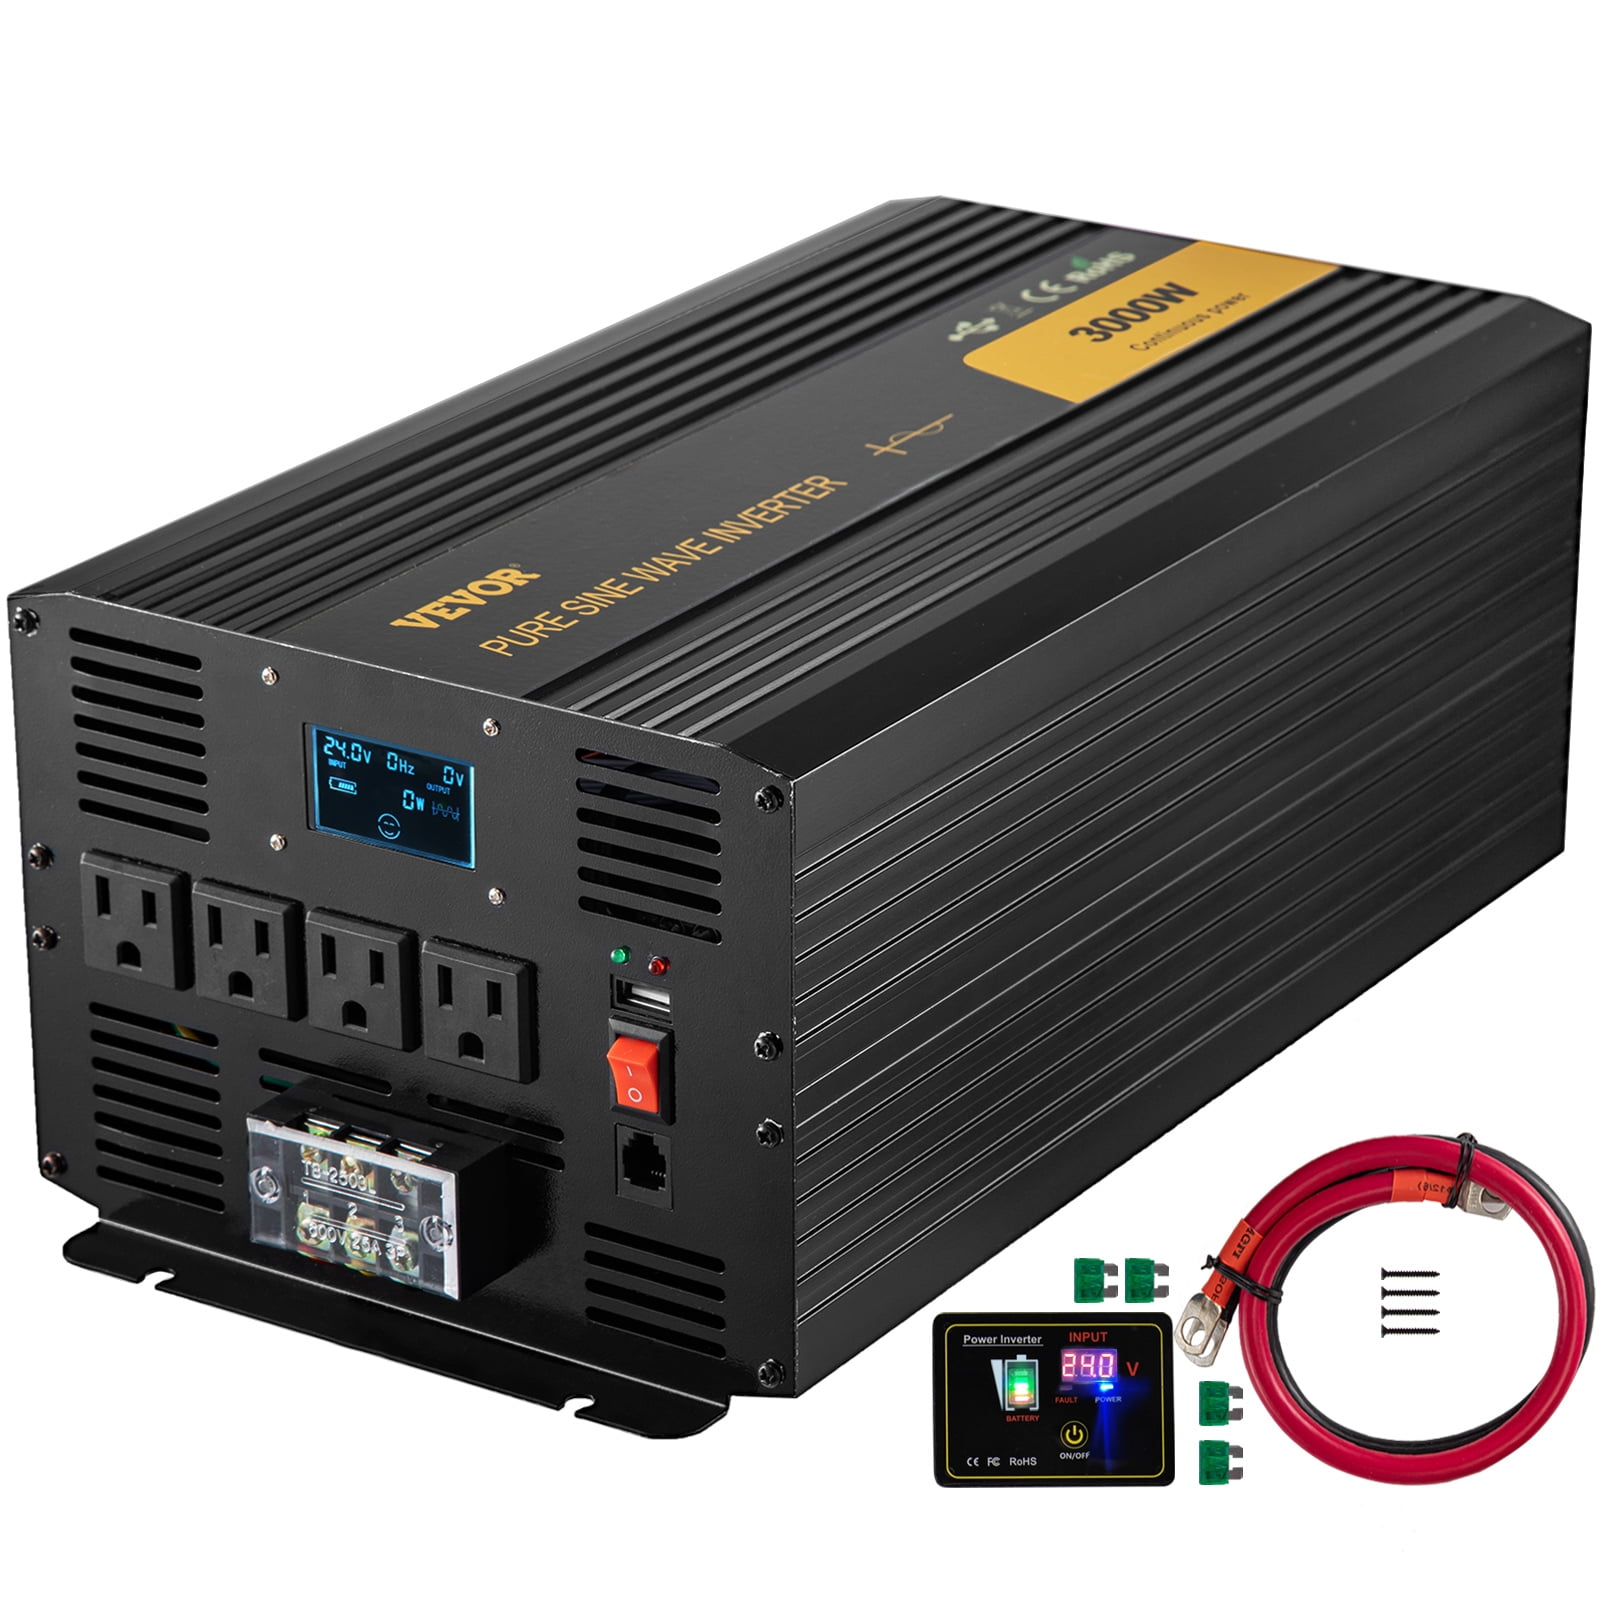 VEVORbrand Pure Sine Wave Inverter 3000W Power Inverter, DC 24V to AC 120V  Car Inverter, with USB Port LCD Display Remote Controller and AC  Outlets,for RV Truck Car Solar System Travel Camping 